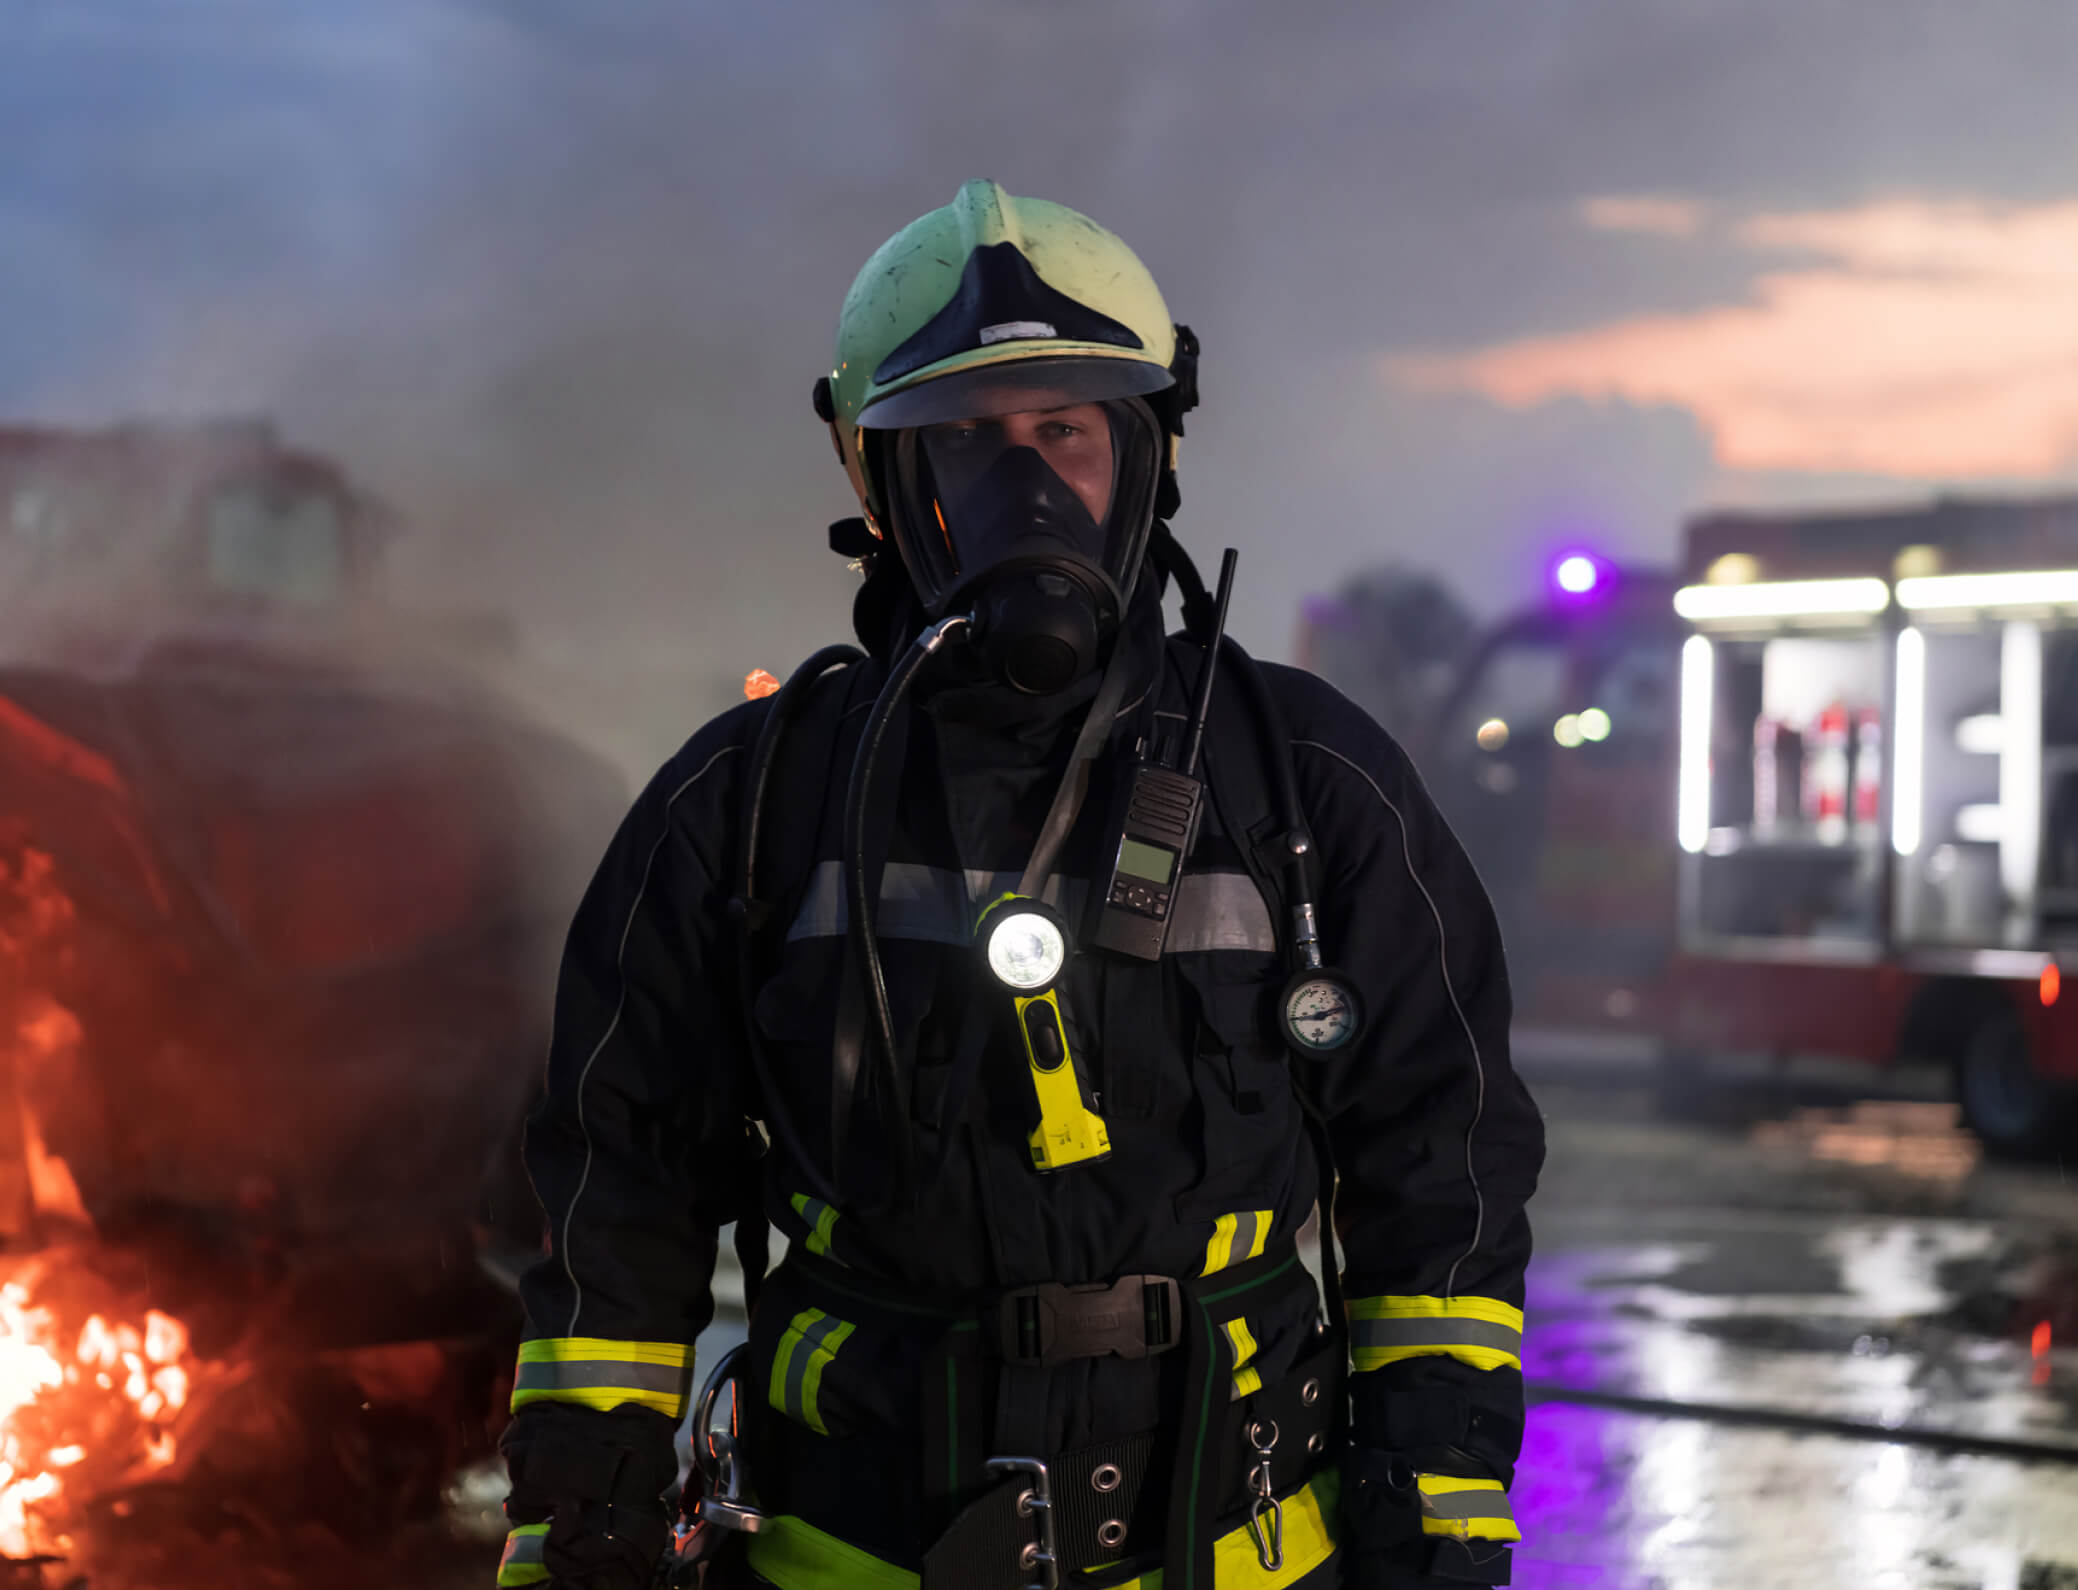 Firefighter using turnout gear